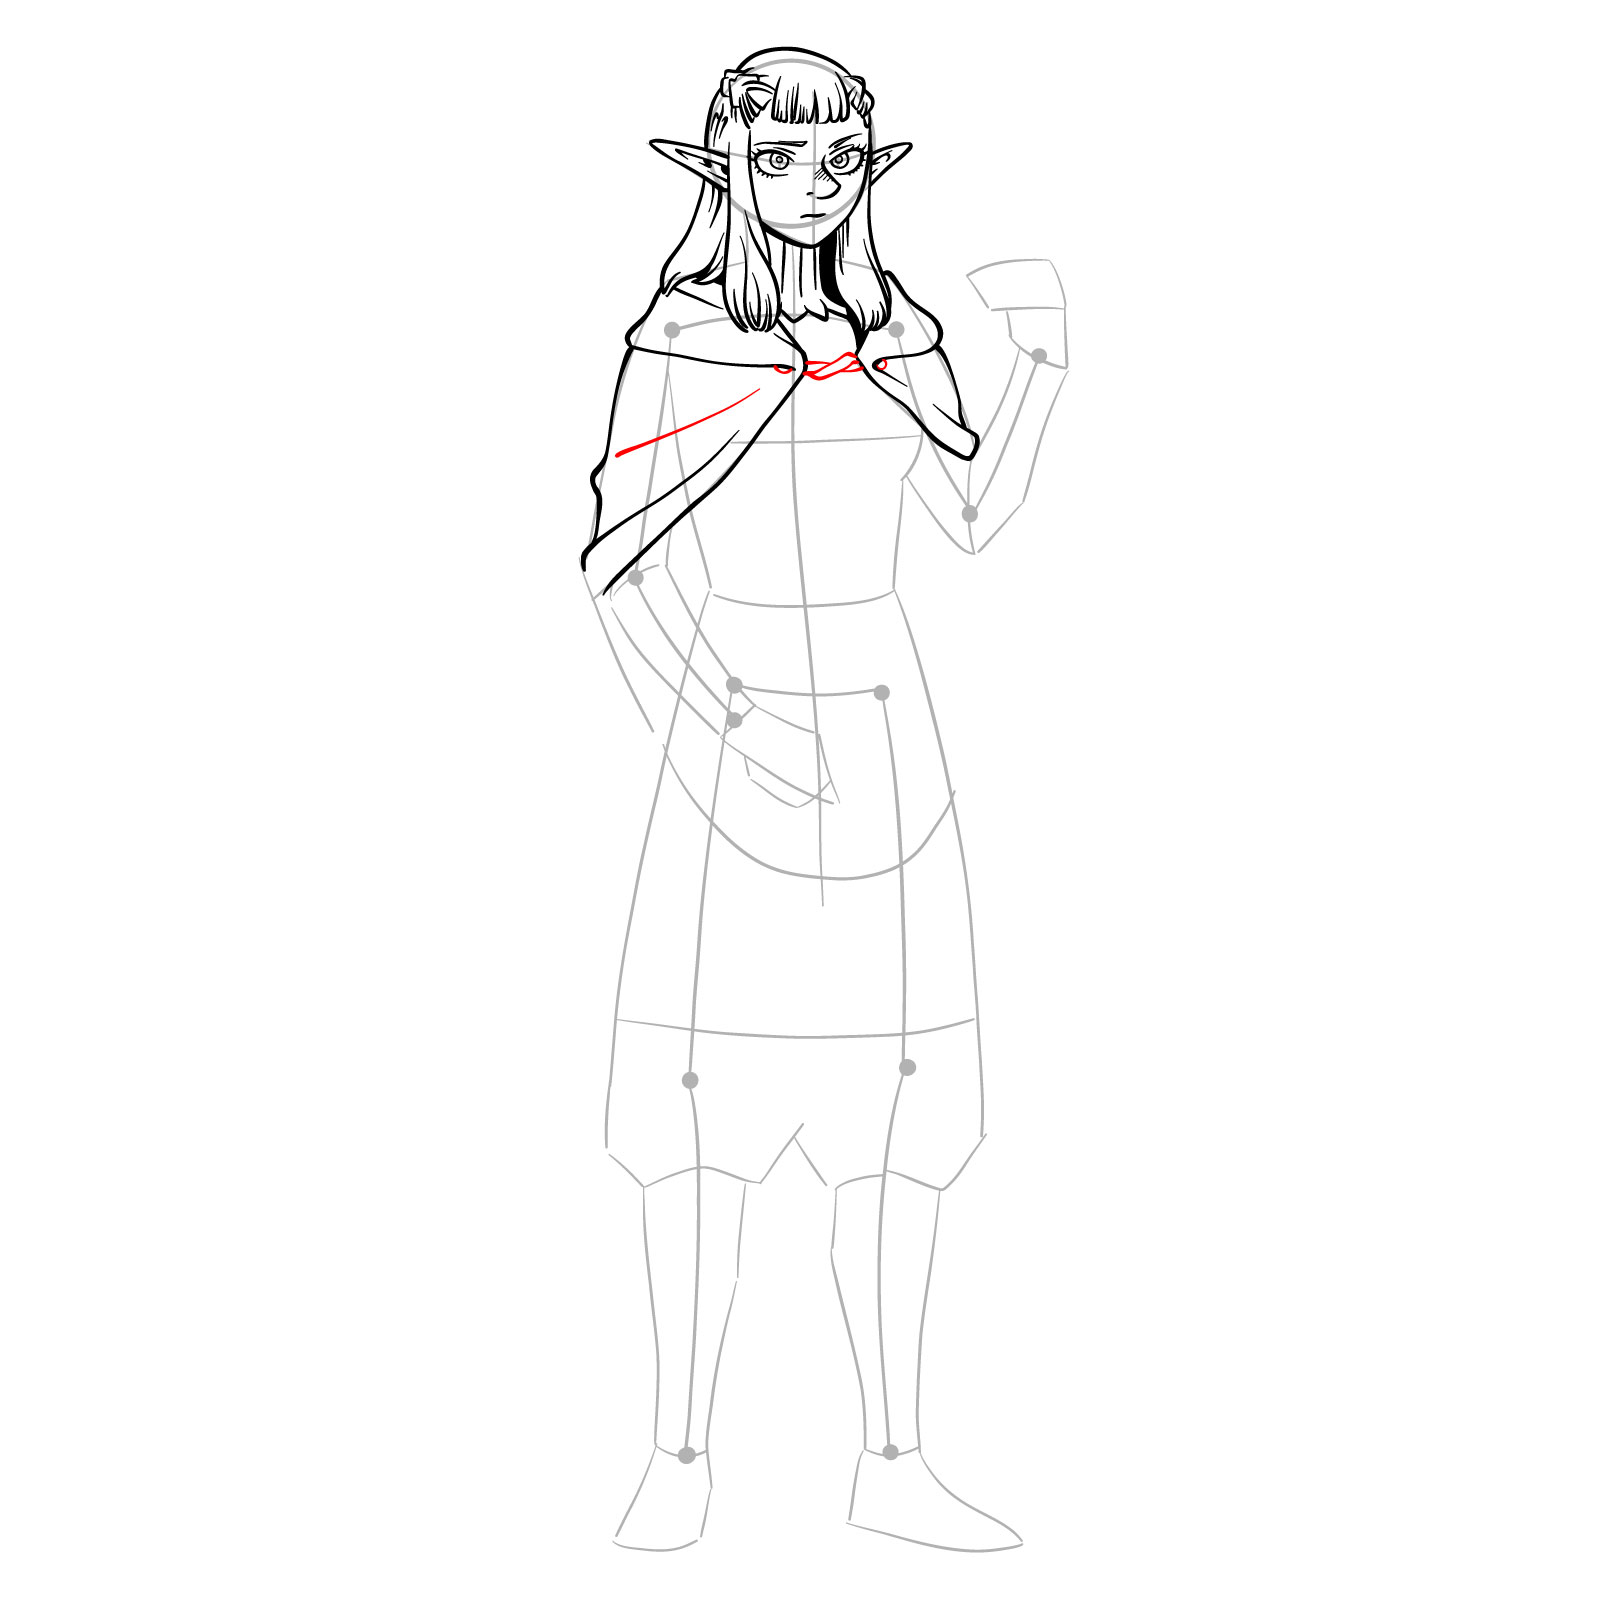 How to draw Pattadol from Delicious in Dungeon - step 12